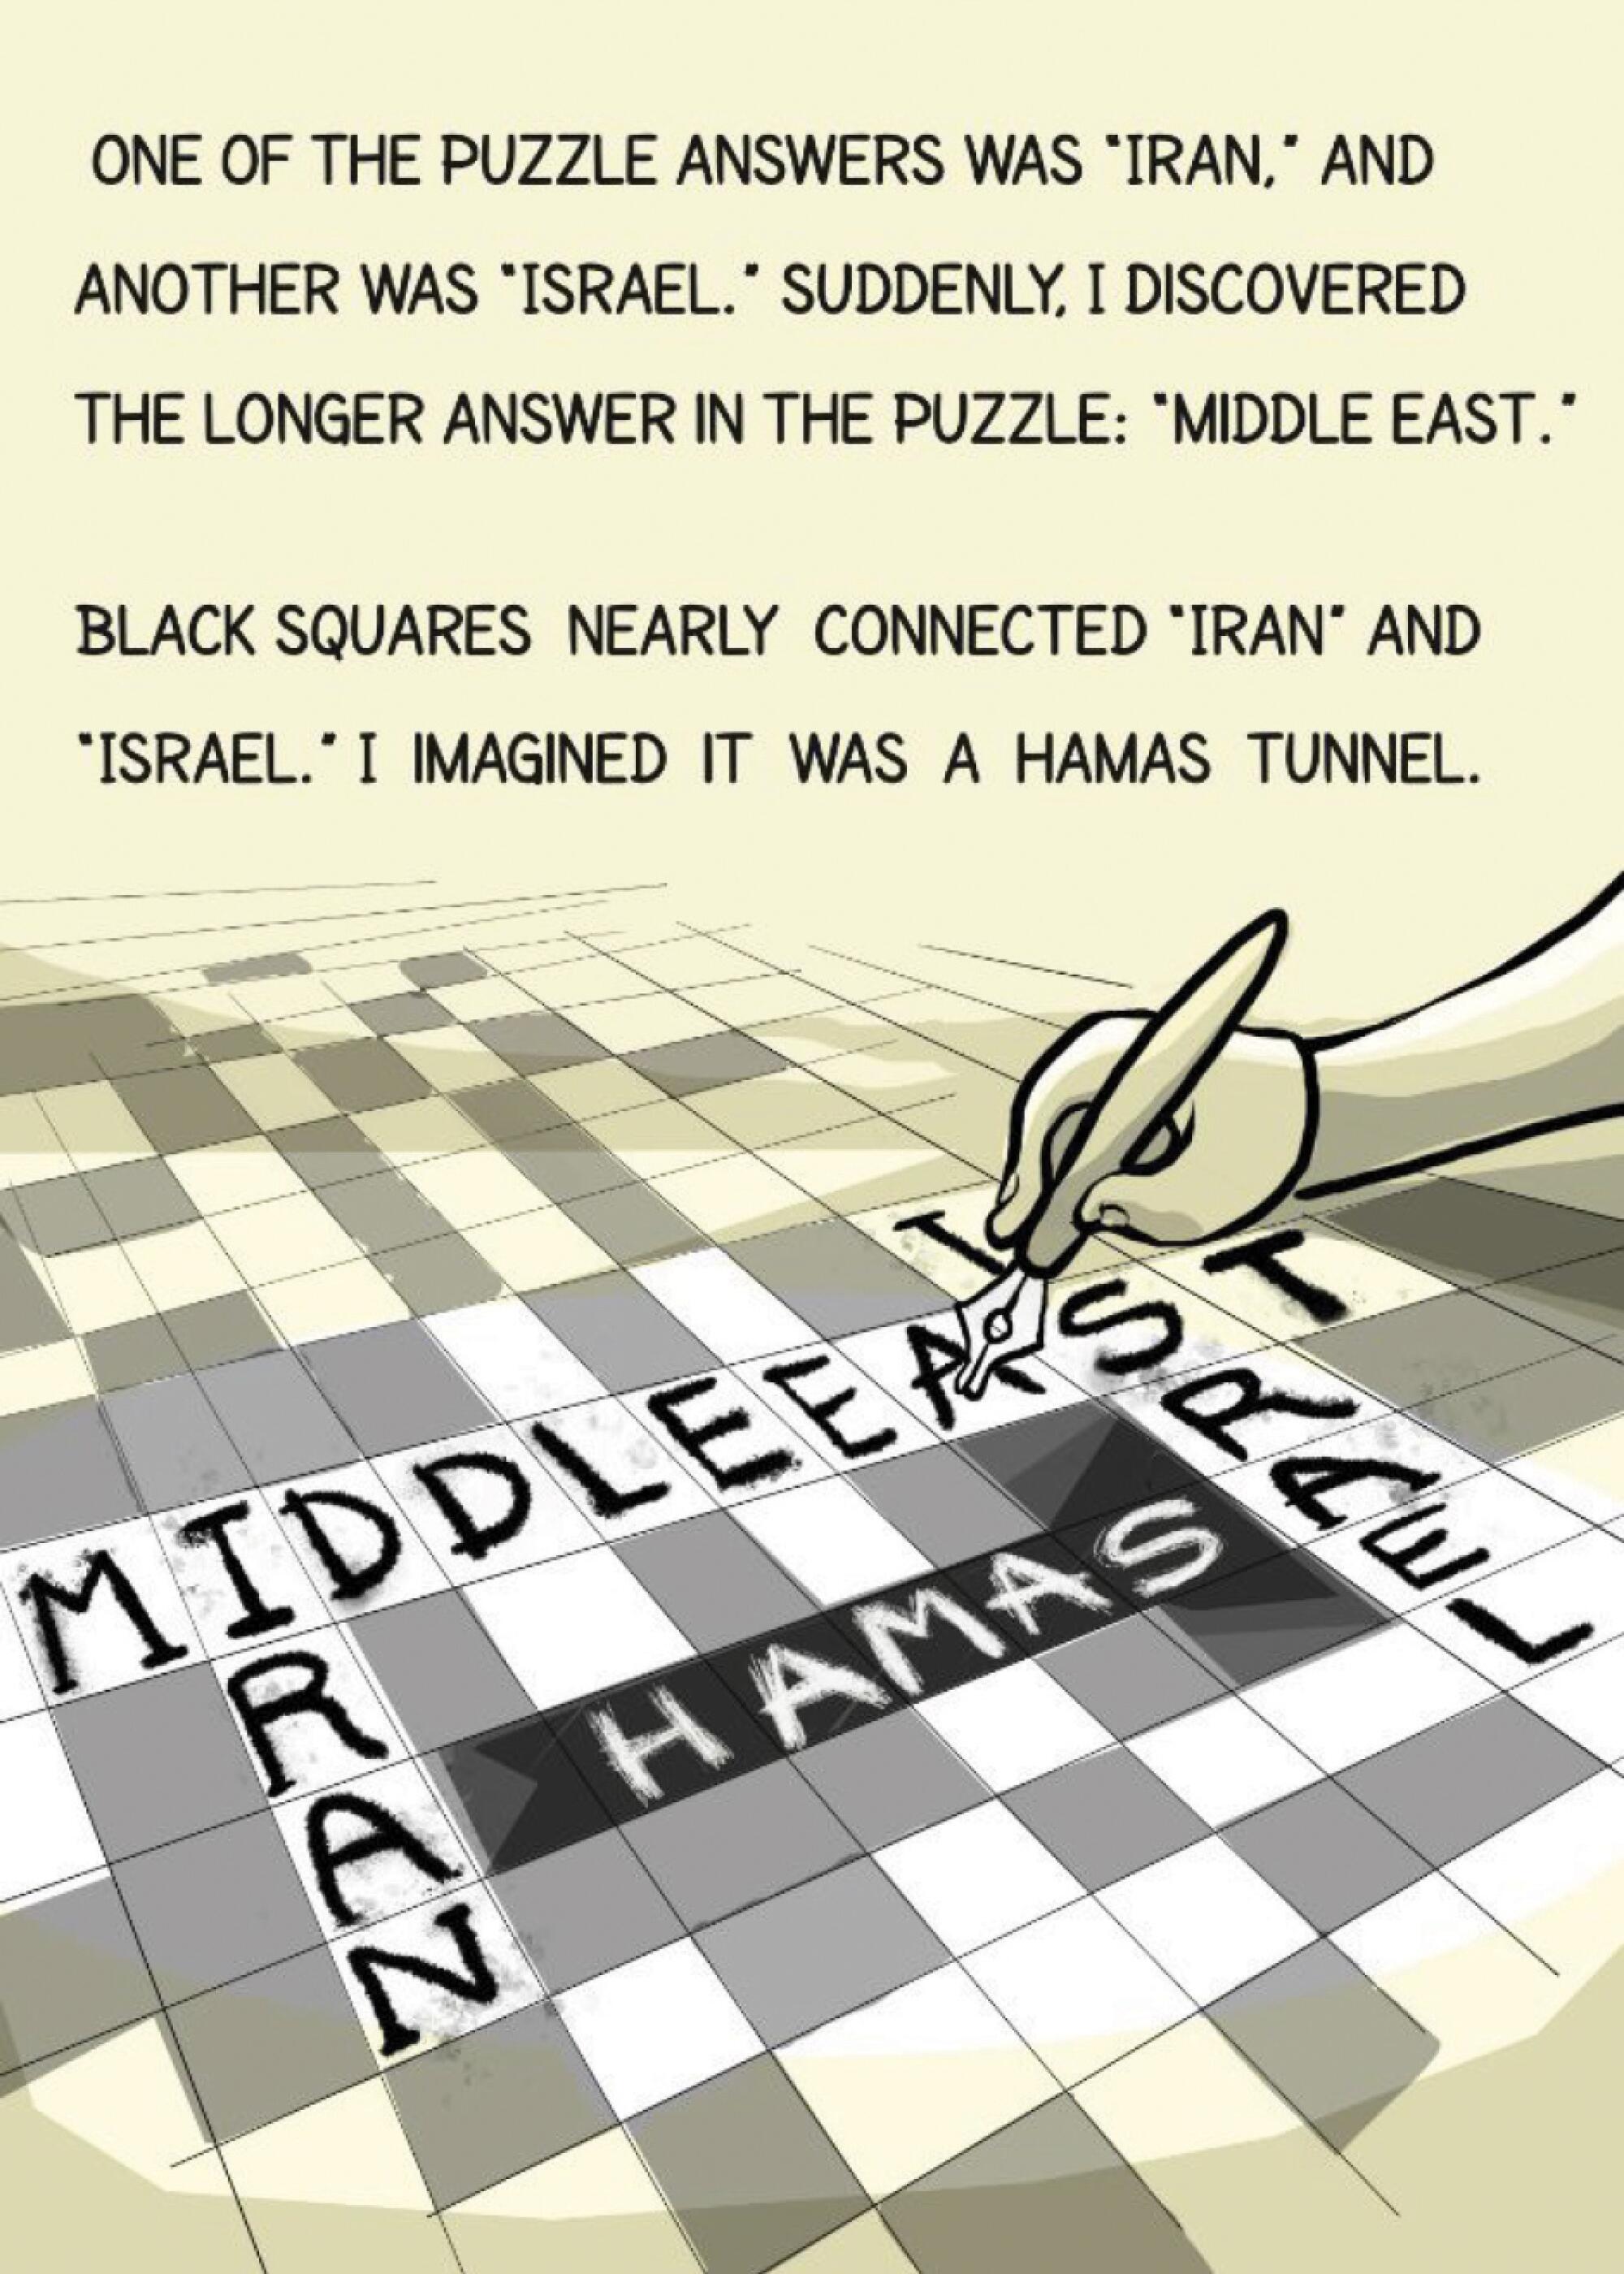 Puzzle answers were "Iran" and "Israel" and "Middle East." Squares connected "Iran" and "Israel." I imagined a hamas tunnel.